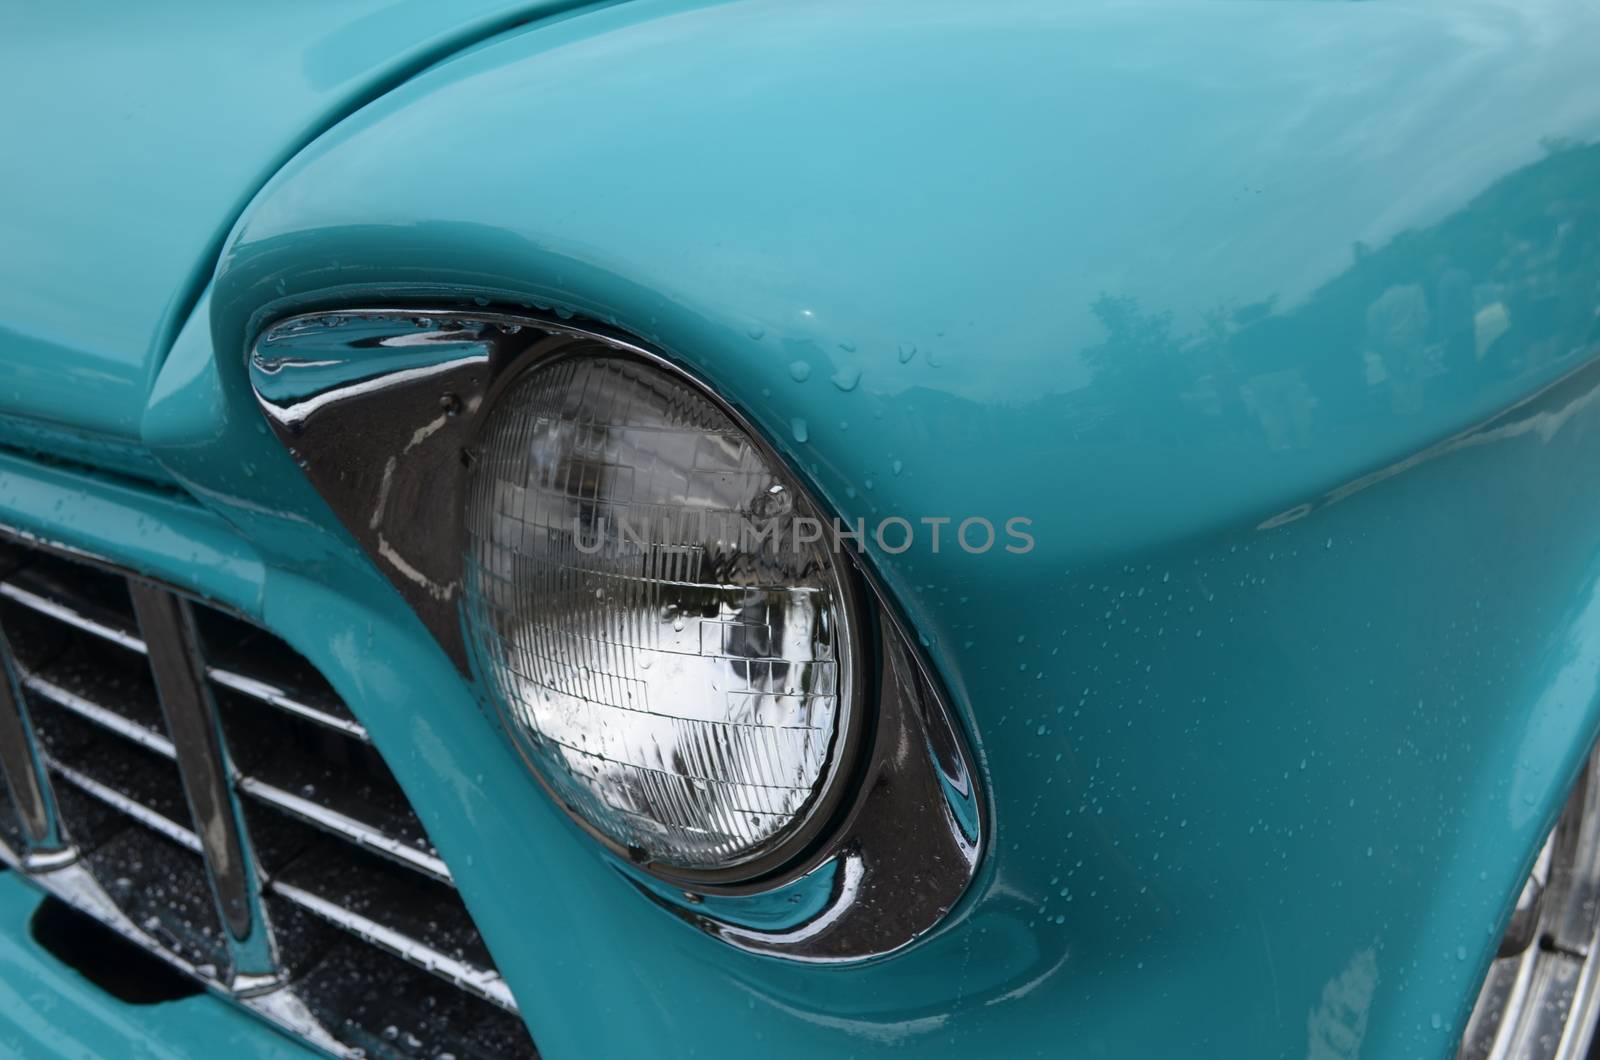 Beautiful restored American classic car with its headlamp and chrome surround shining with rain drops on its paint work.